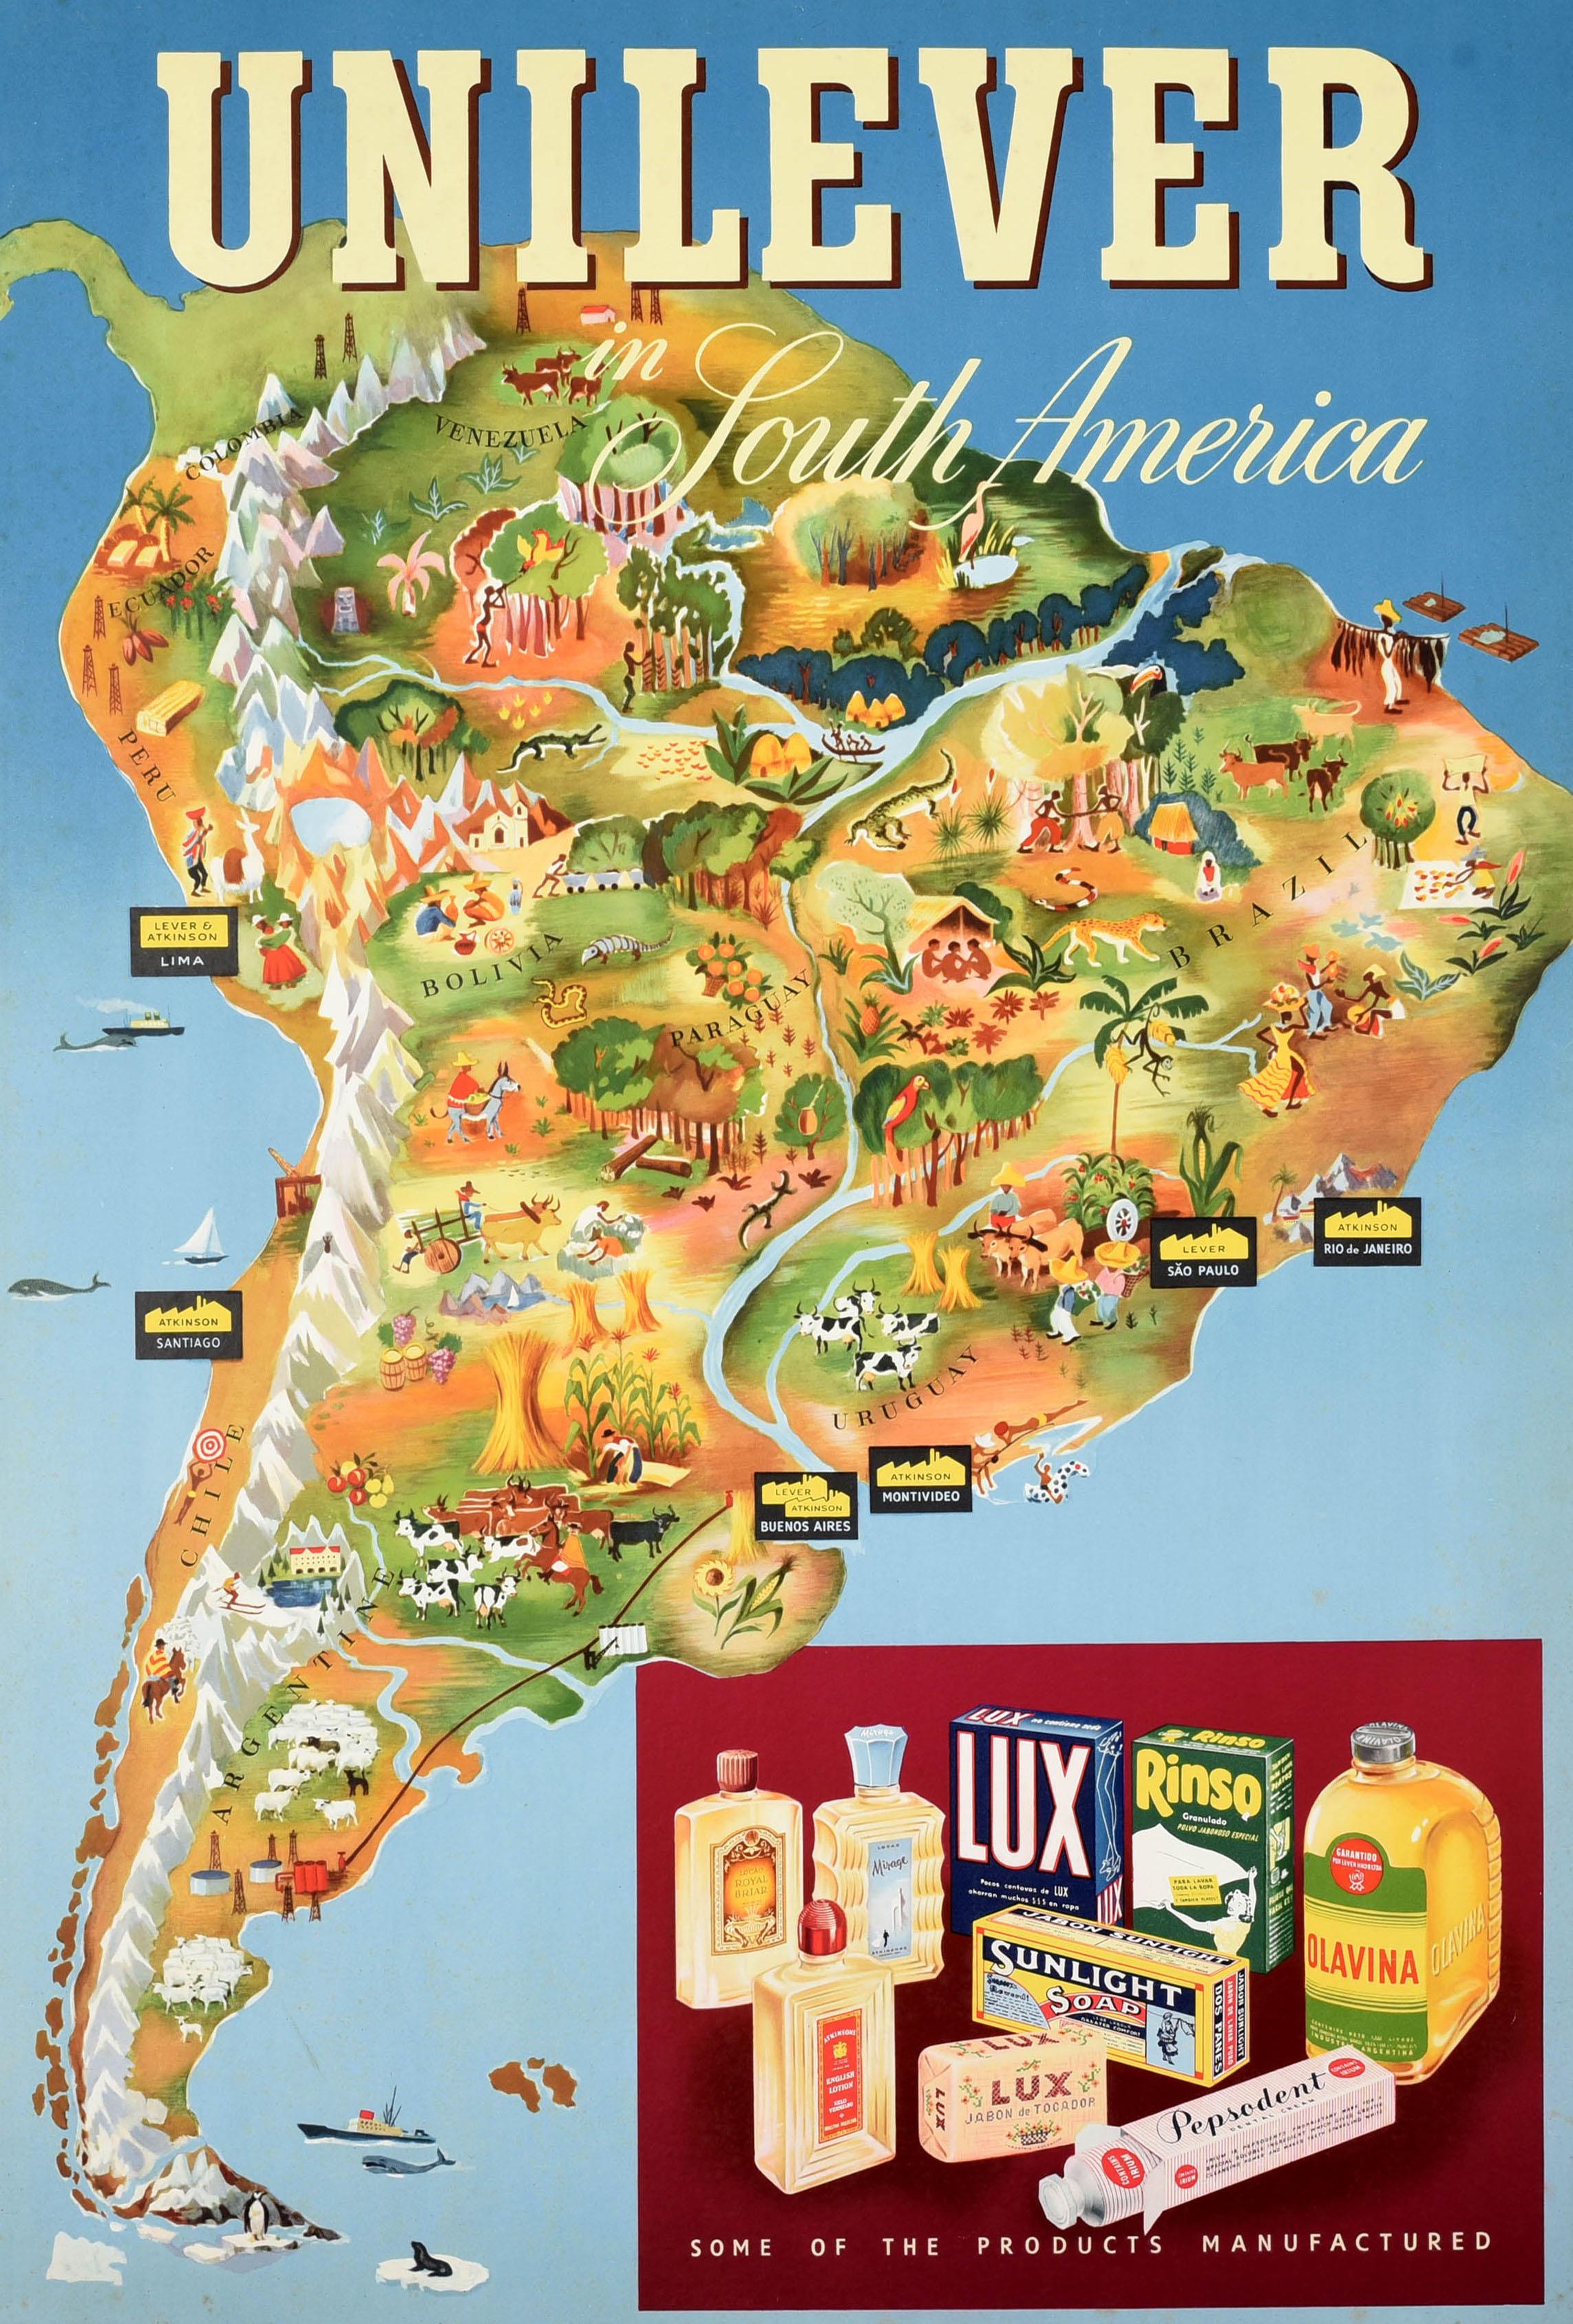 Original vintage advertising poster for Unilever in South America featuring a colourful illustrated map marking the factories - Lever & Atkinson Lima Peru / Atkinson Santiago Chile / Lever Atkinson Buenos Aires Argentina / Atkinson Montevideo